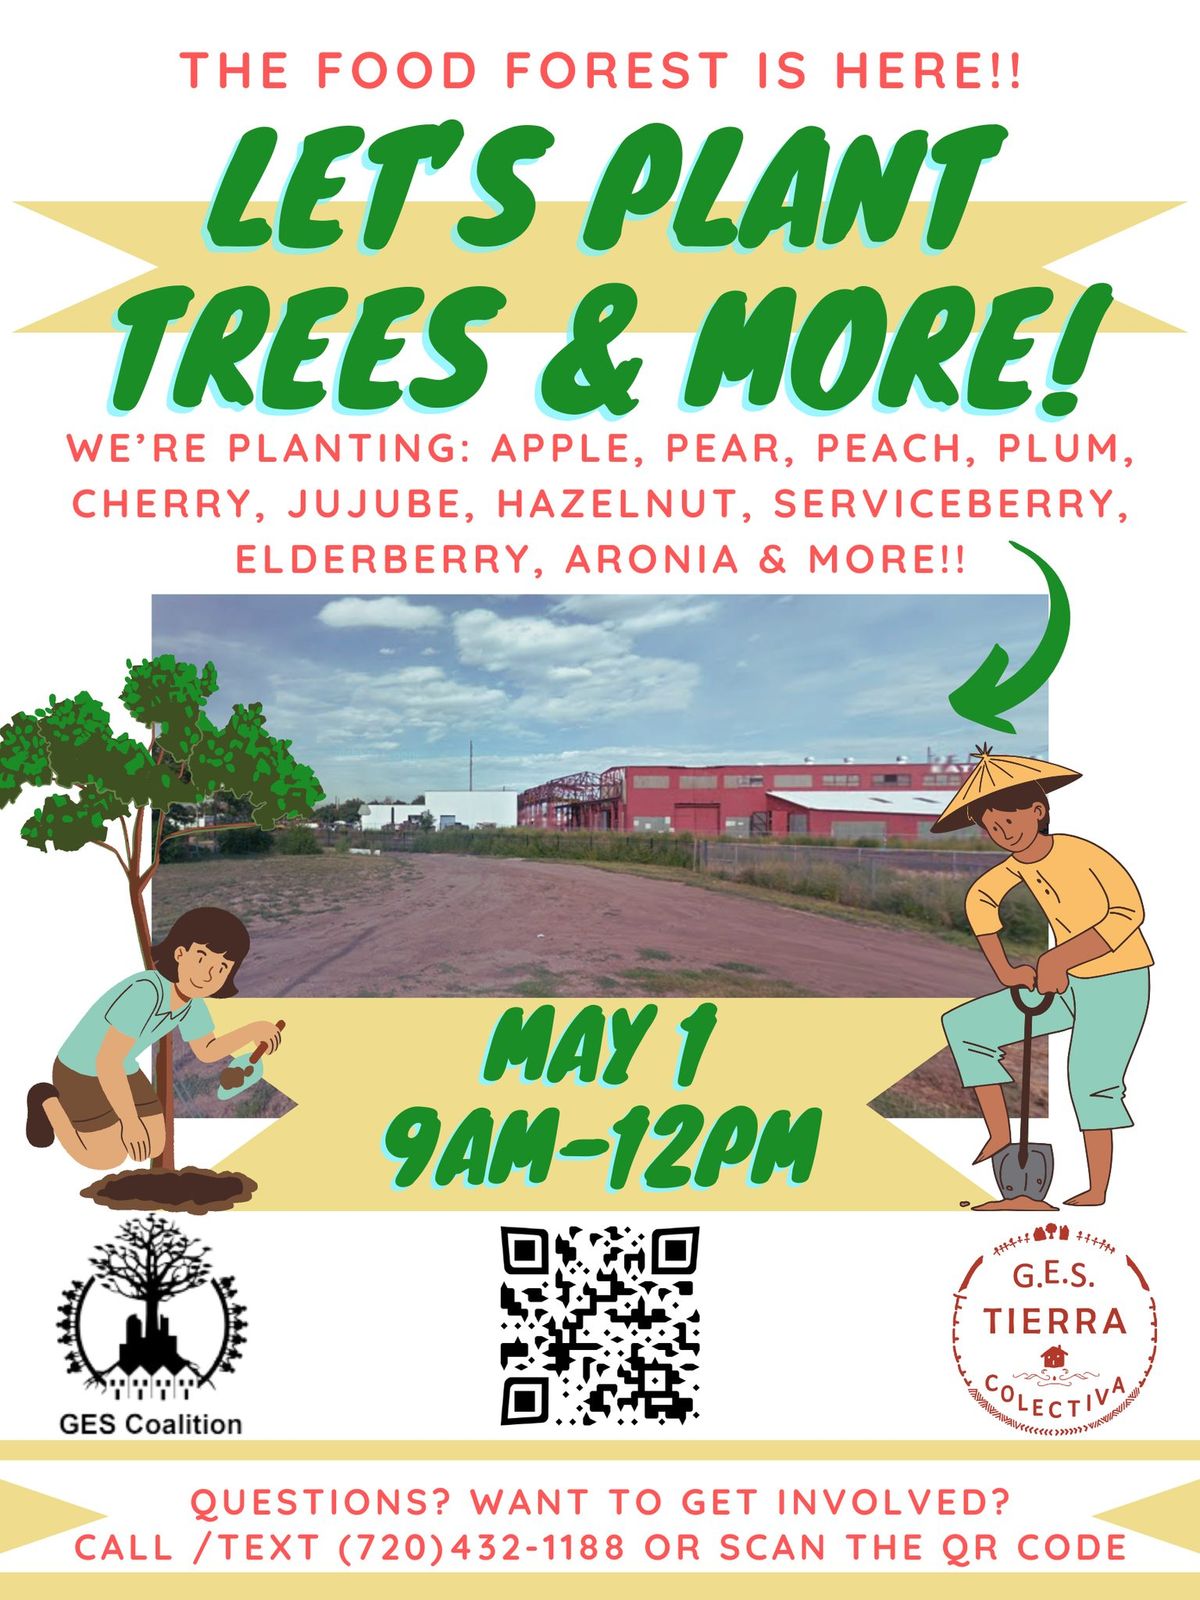 Food Forest Tree Planting!